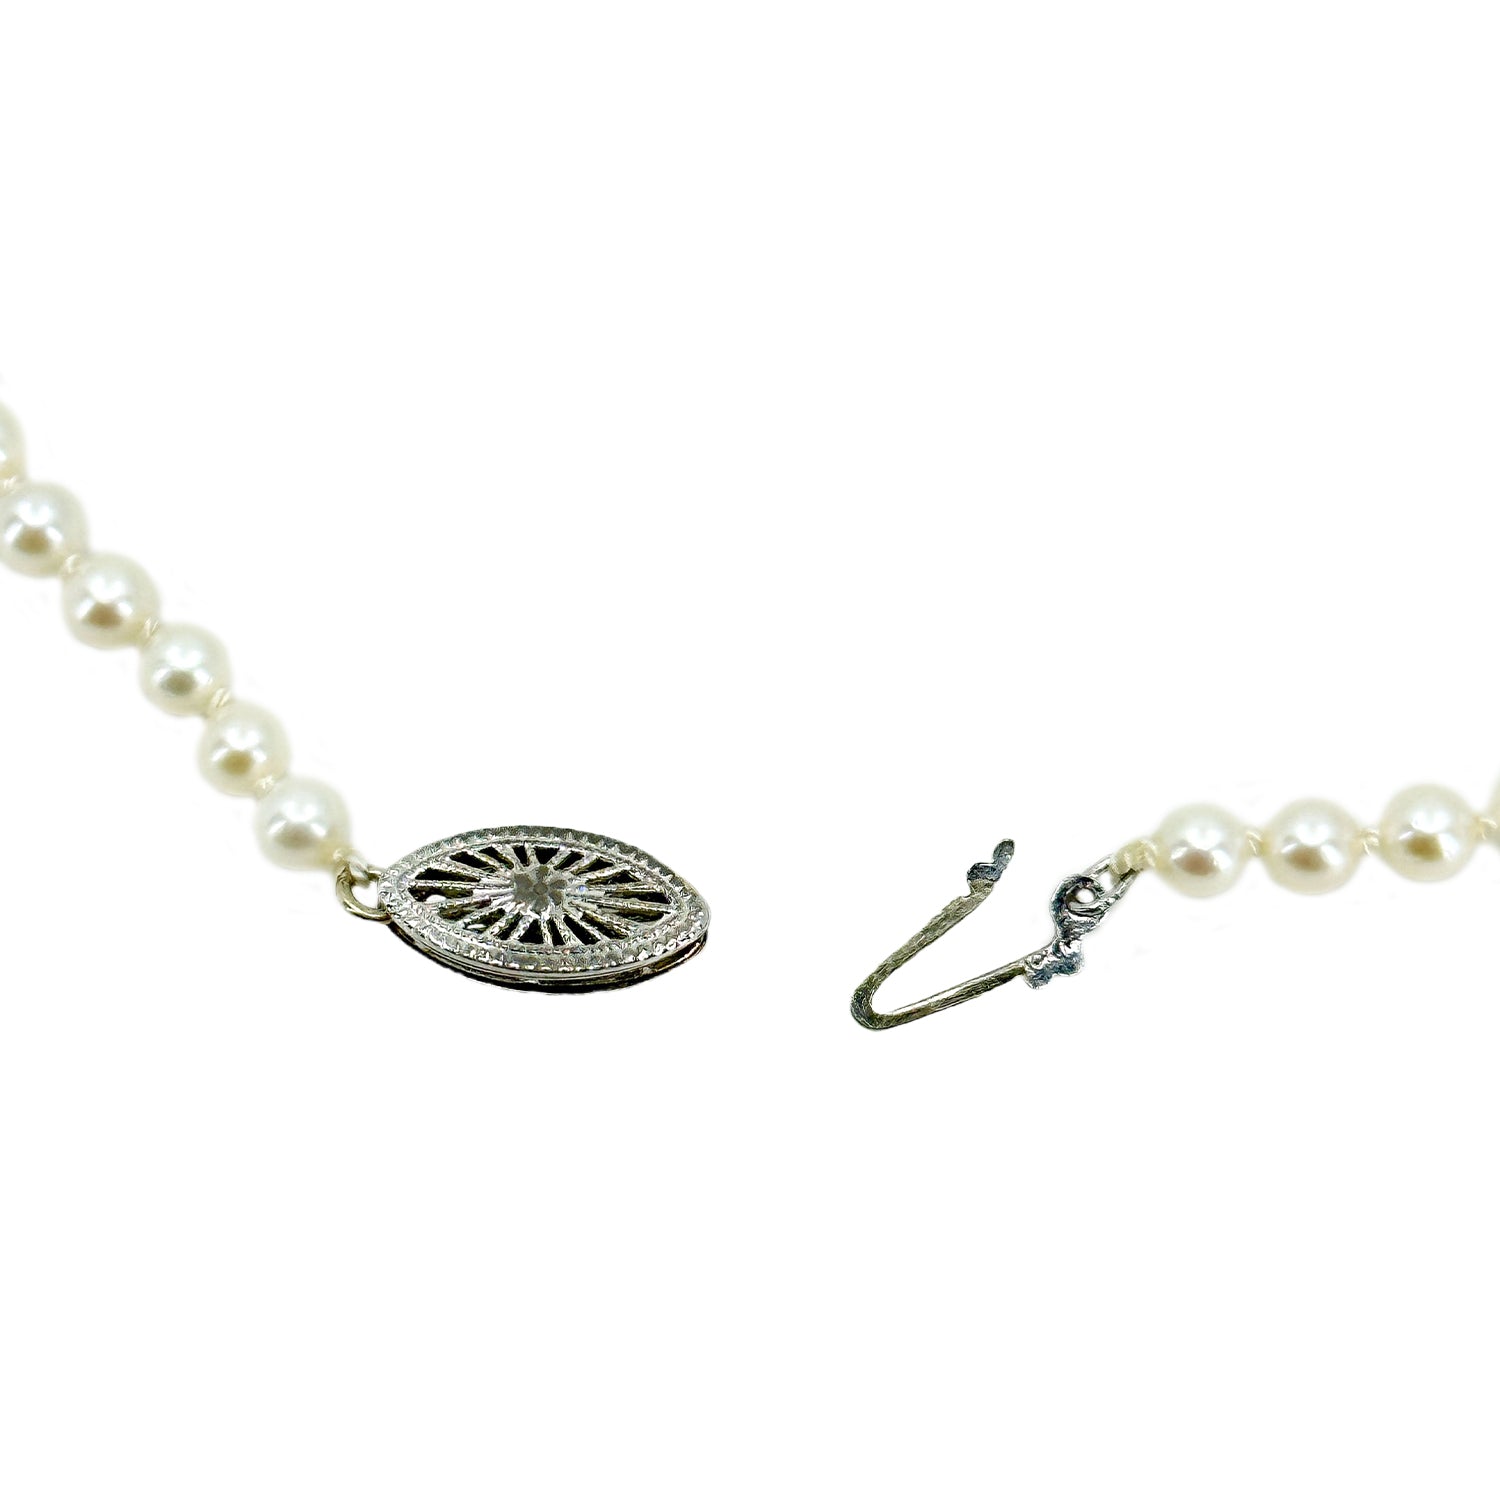 Retro Filigree Japanese Saltwater Cultured Akoya Pearl Necklace - 10K White Gold 20.75 Inch